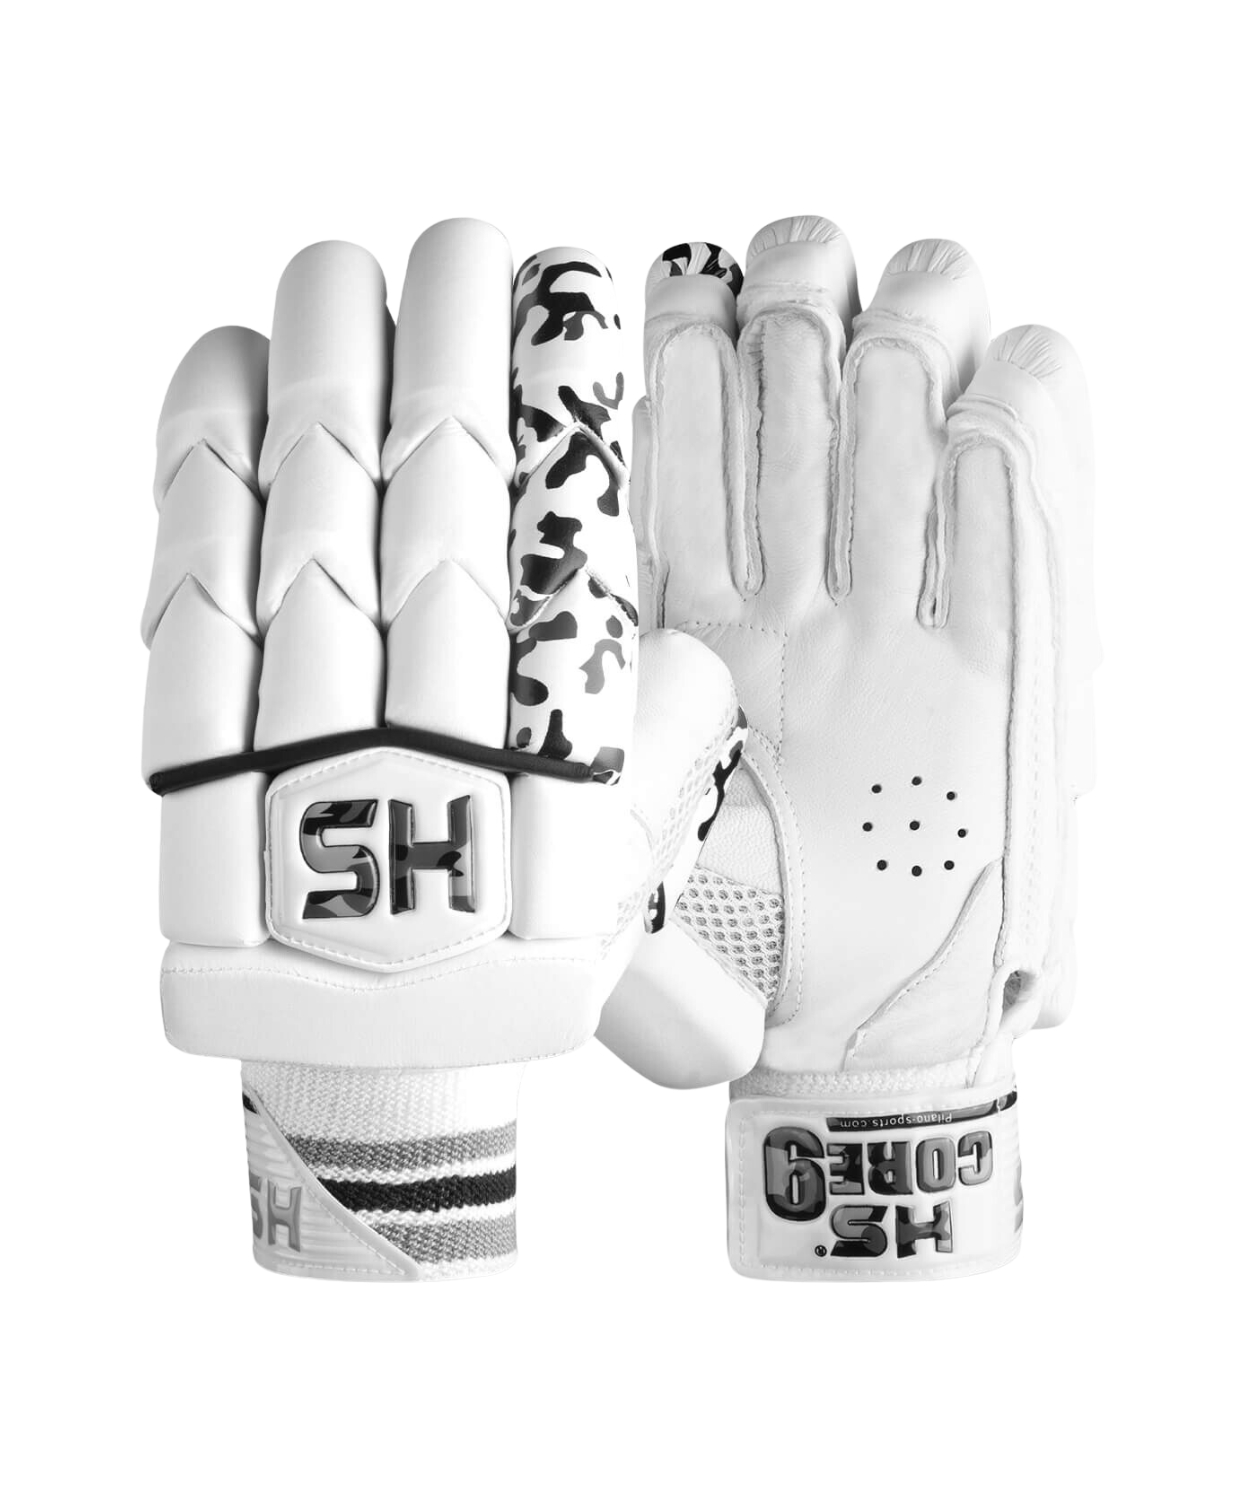 Core 9 Batting Gloves The Shoppies